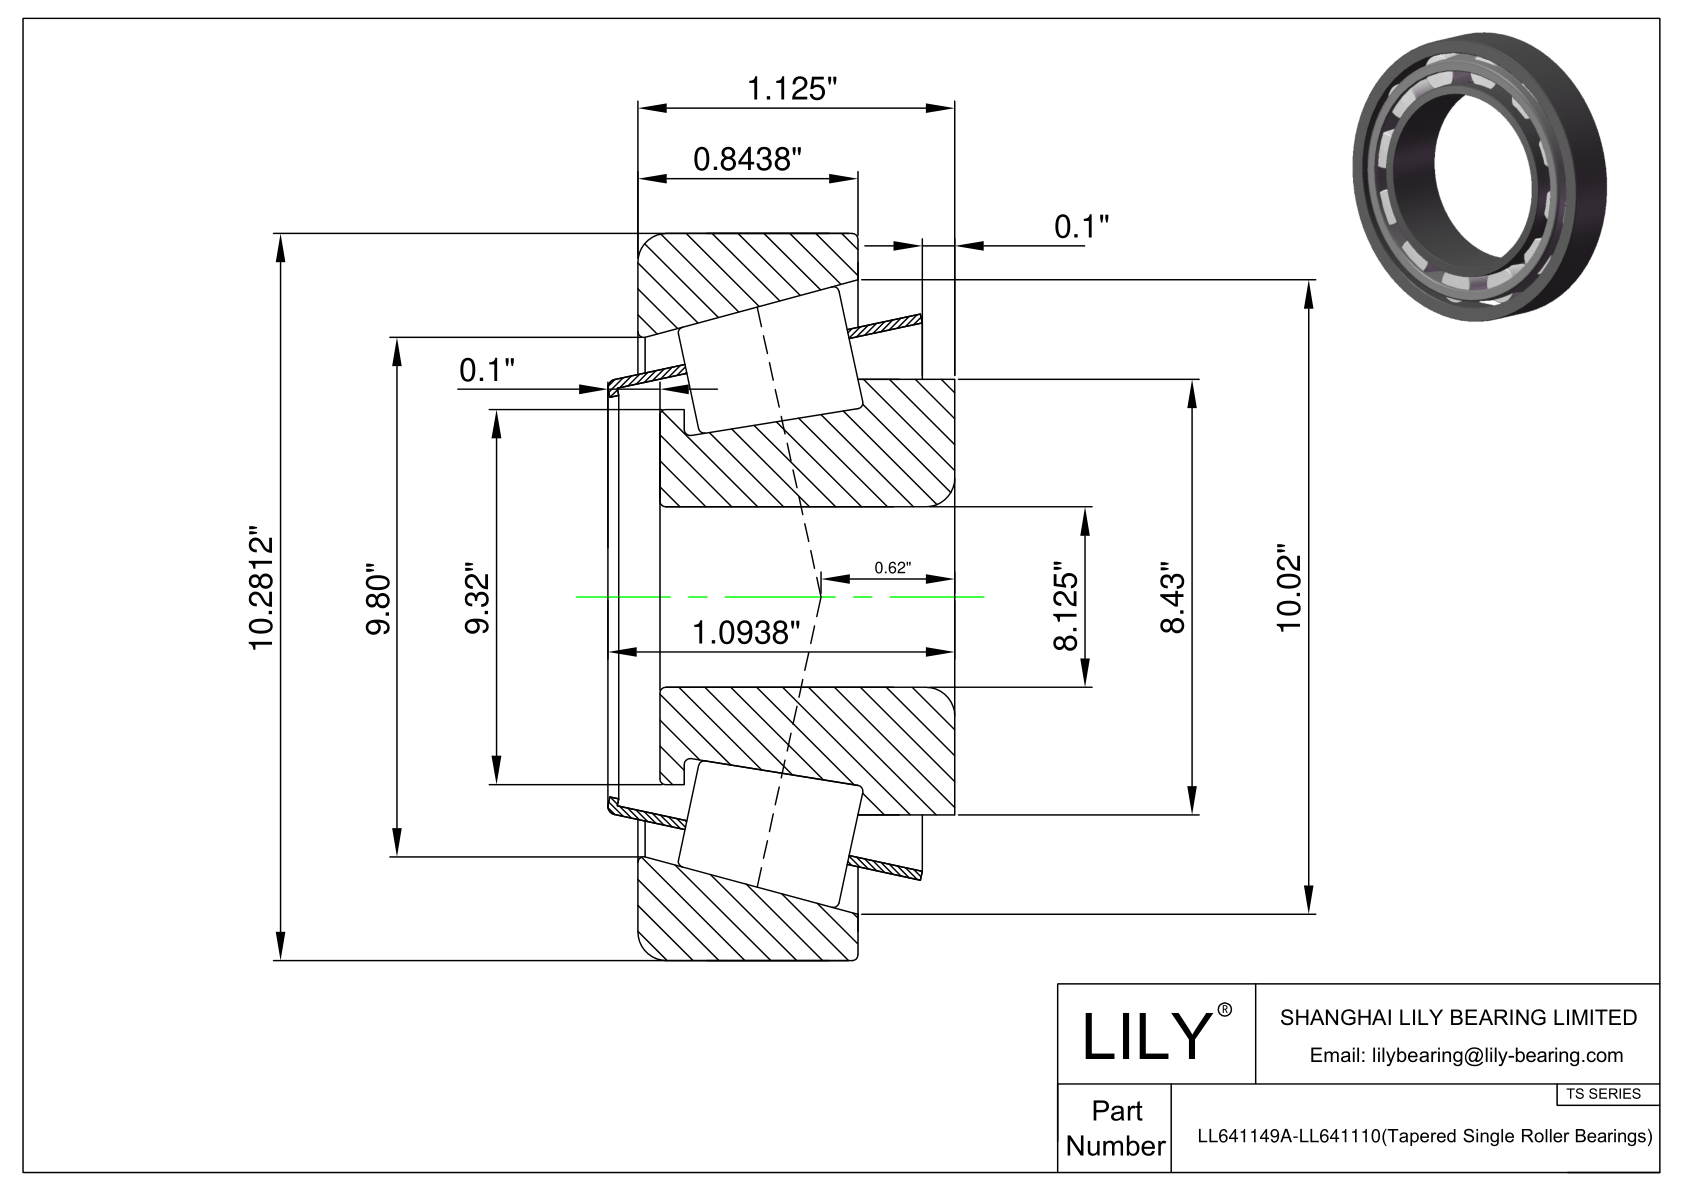 LL641149A-LL641110 TS (Tapered Single Roller Bearings) (Imperial) cad drawing